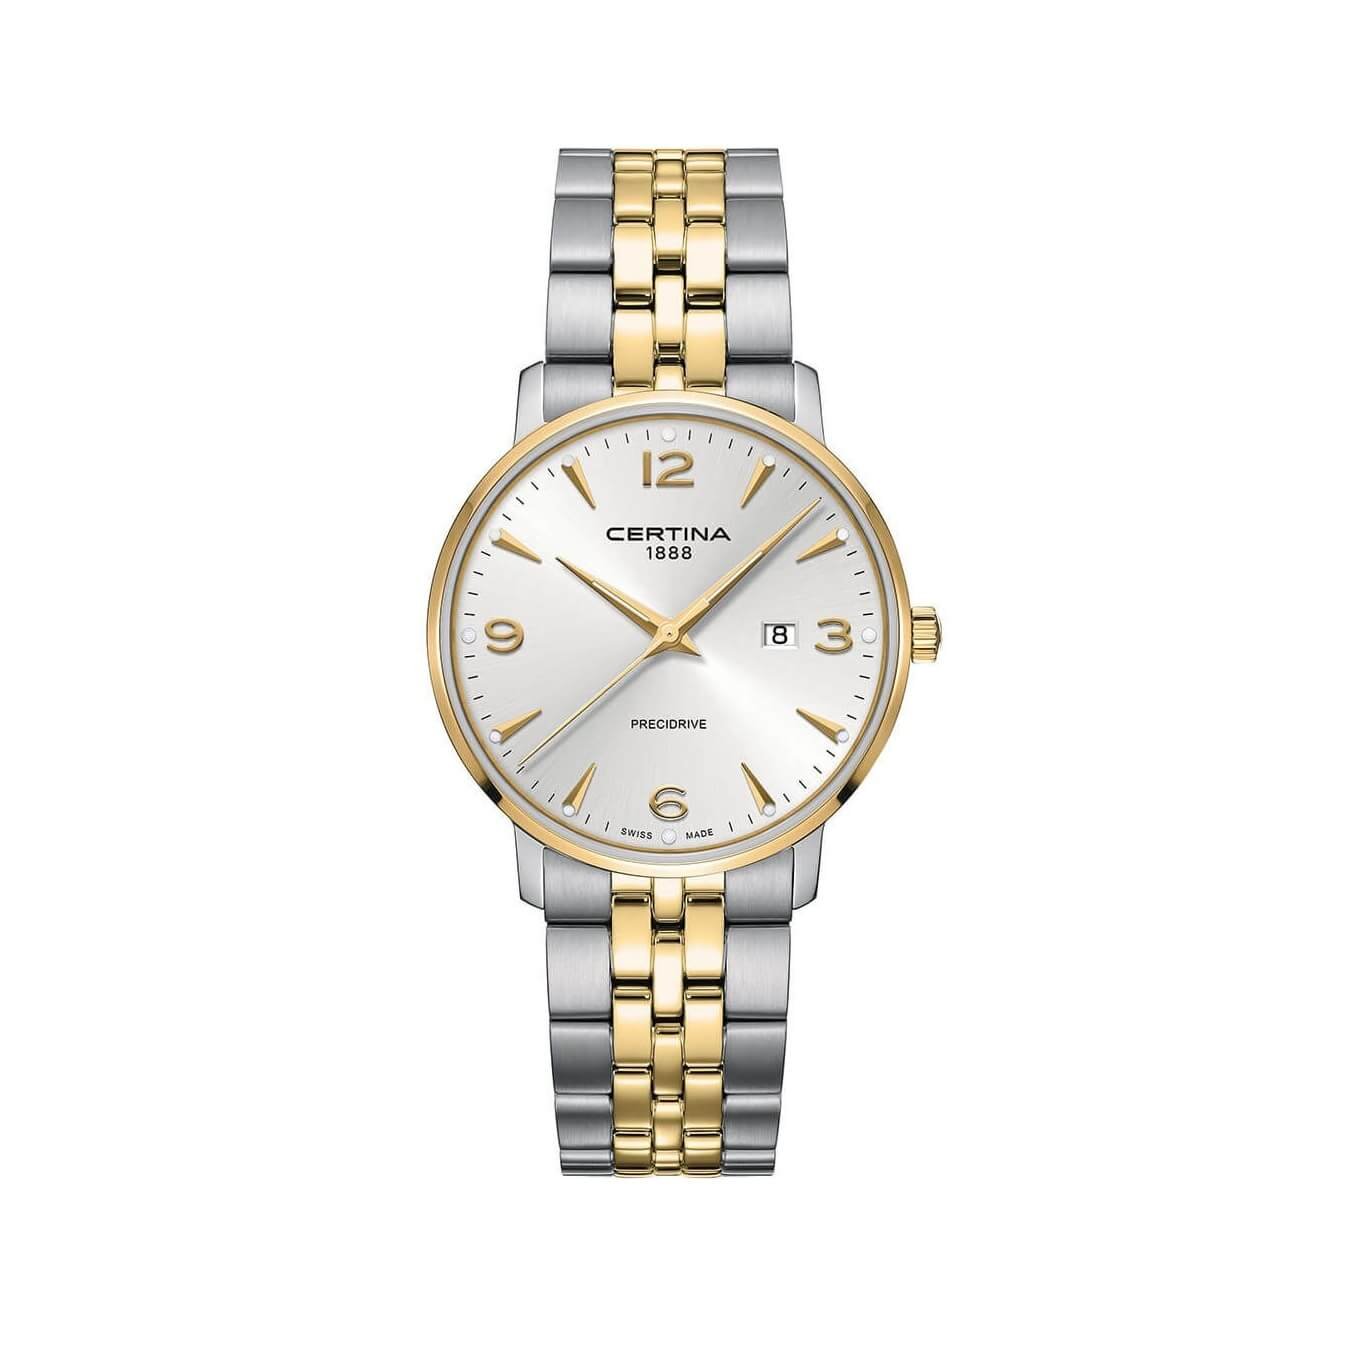 Certina DS Caimano 39 mm Two tone